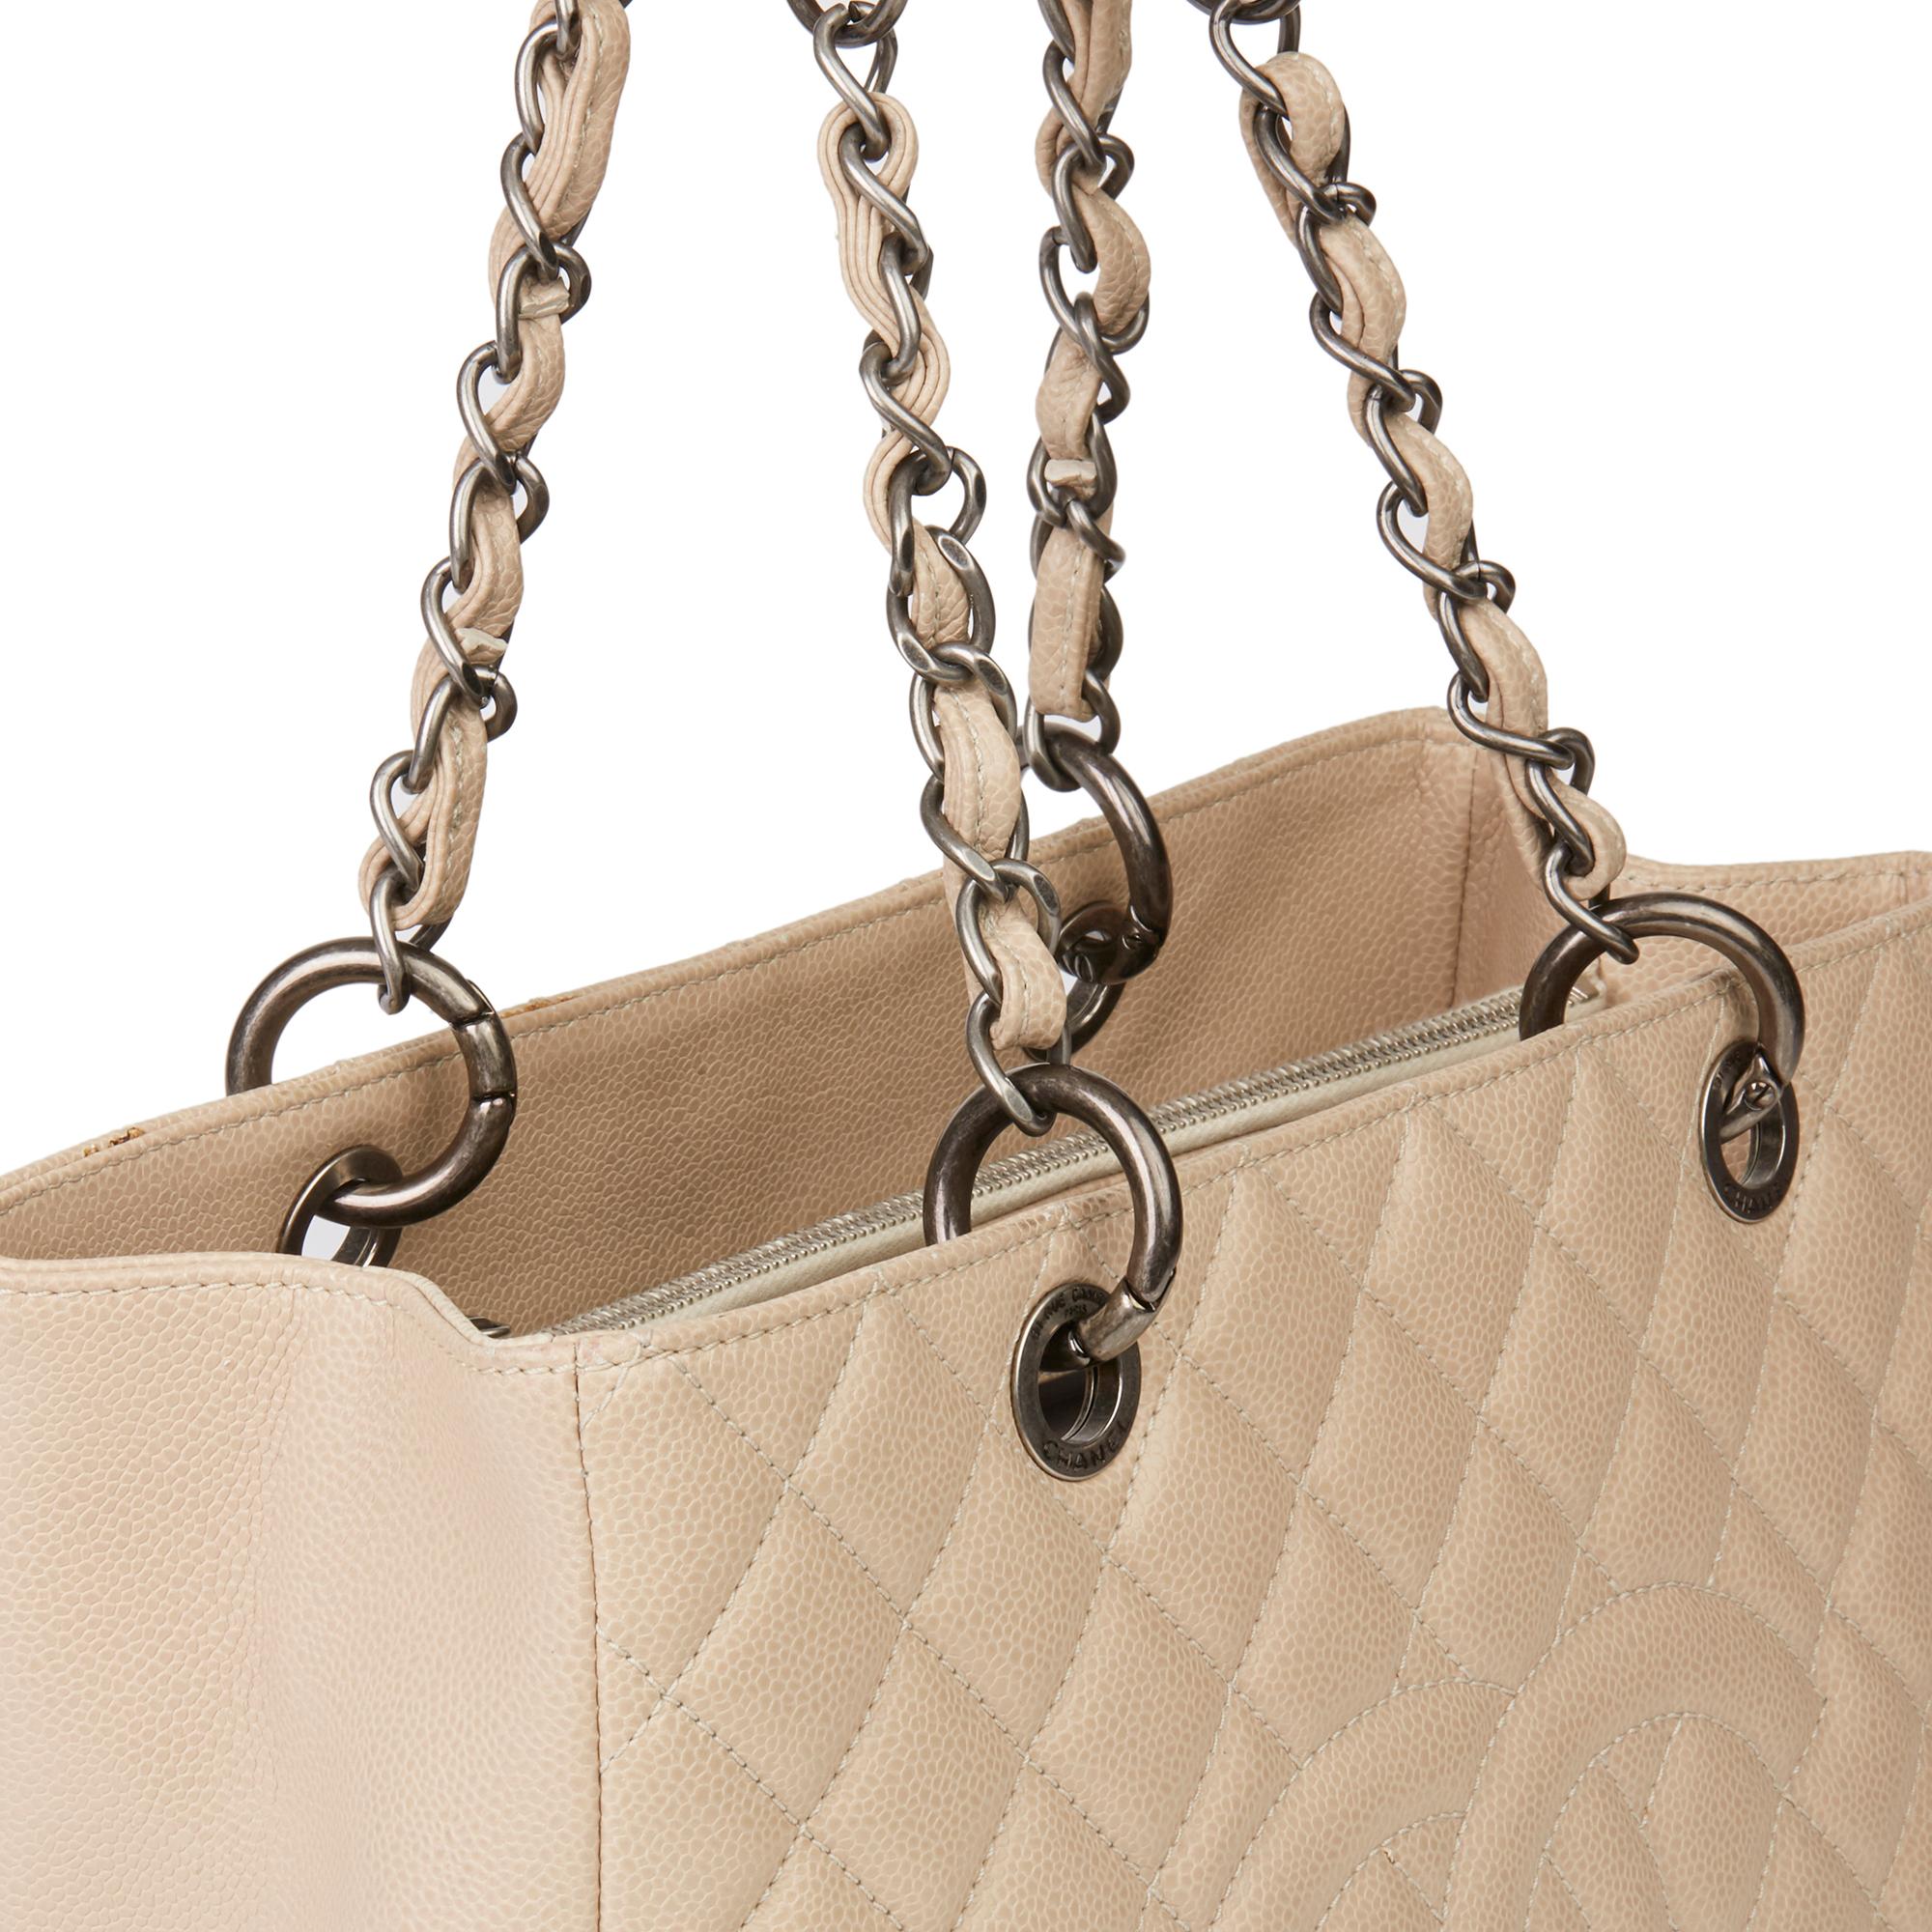 2010 Beige Quilted Caviar Leather Grand Shopping Tote GST 3